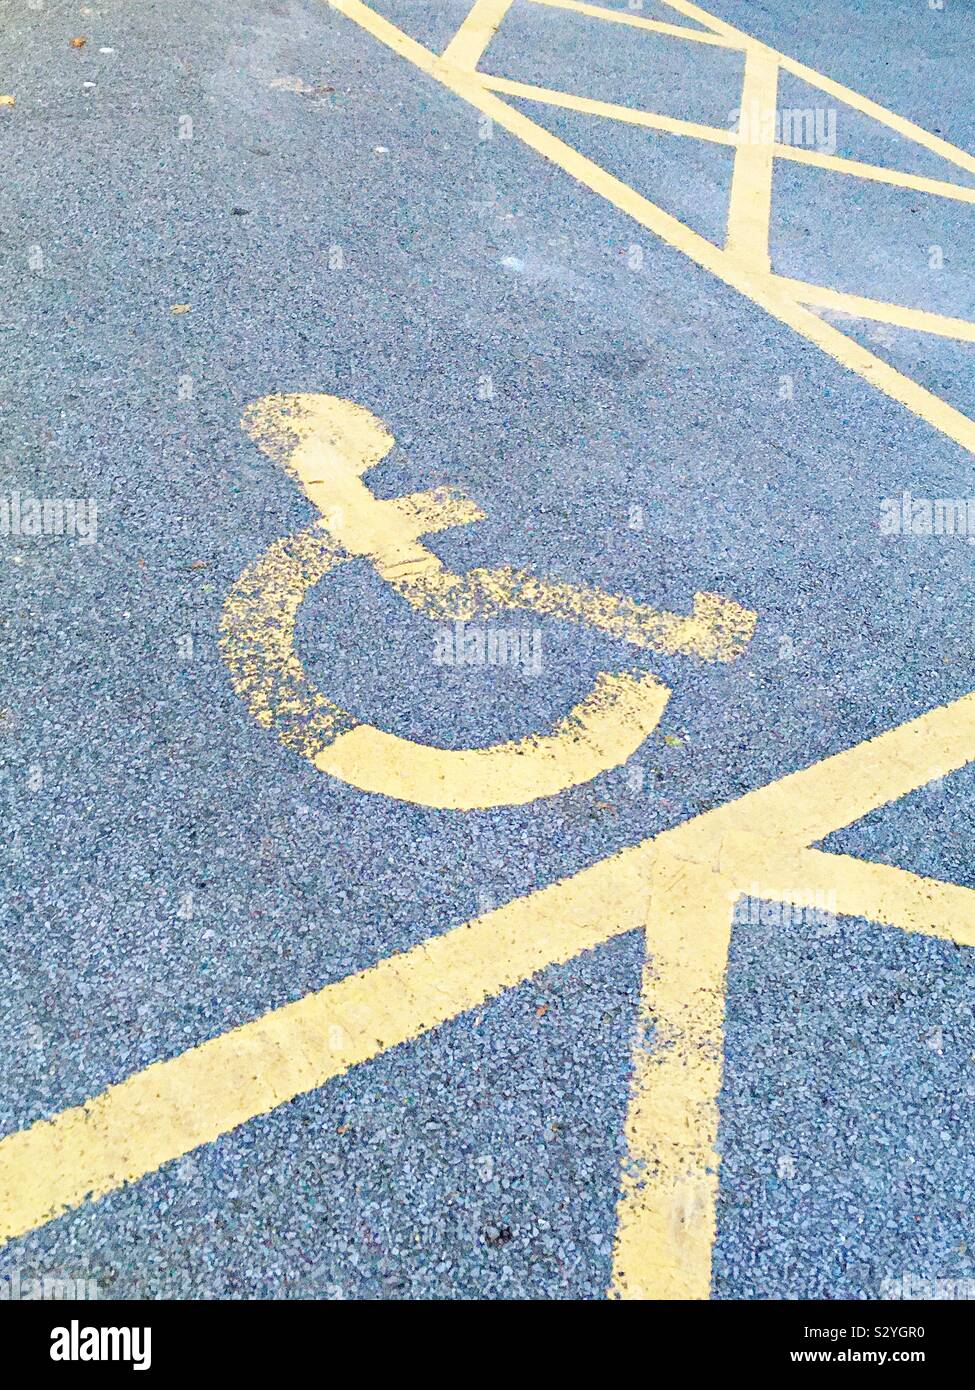 A disabled parking space in a car park Stock Photo